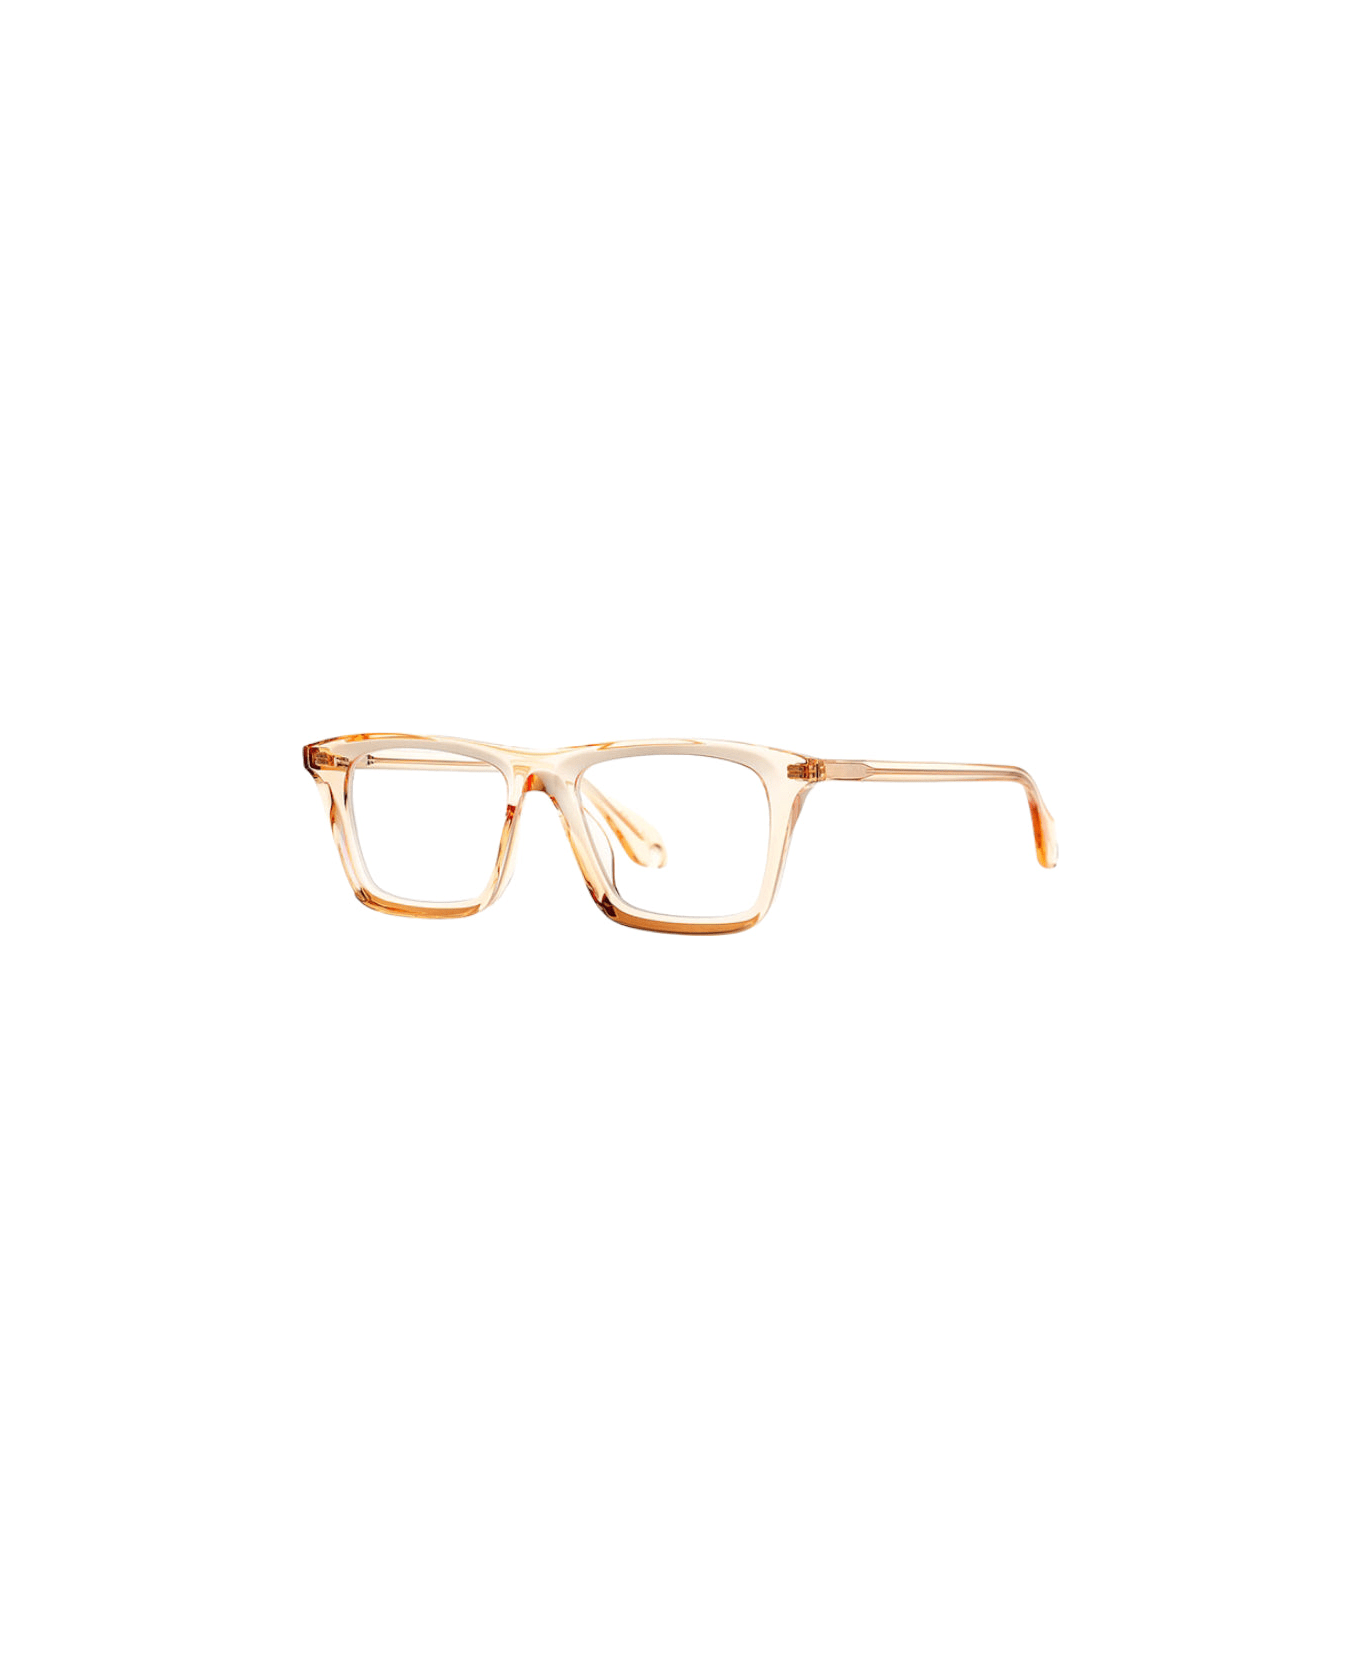 Theo Eyewear Mille +87 - Champagne Glasses